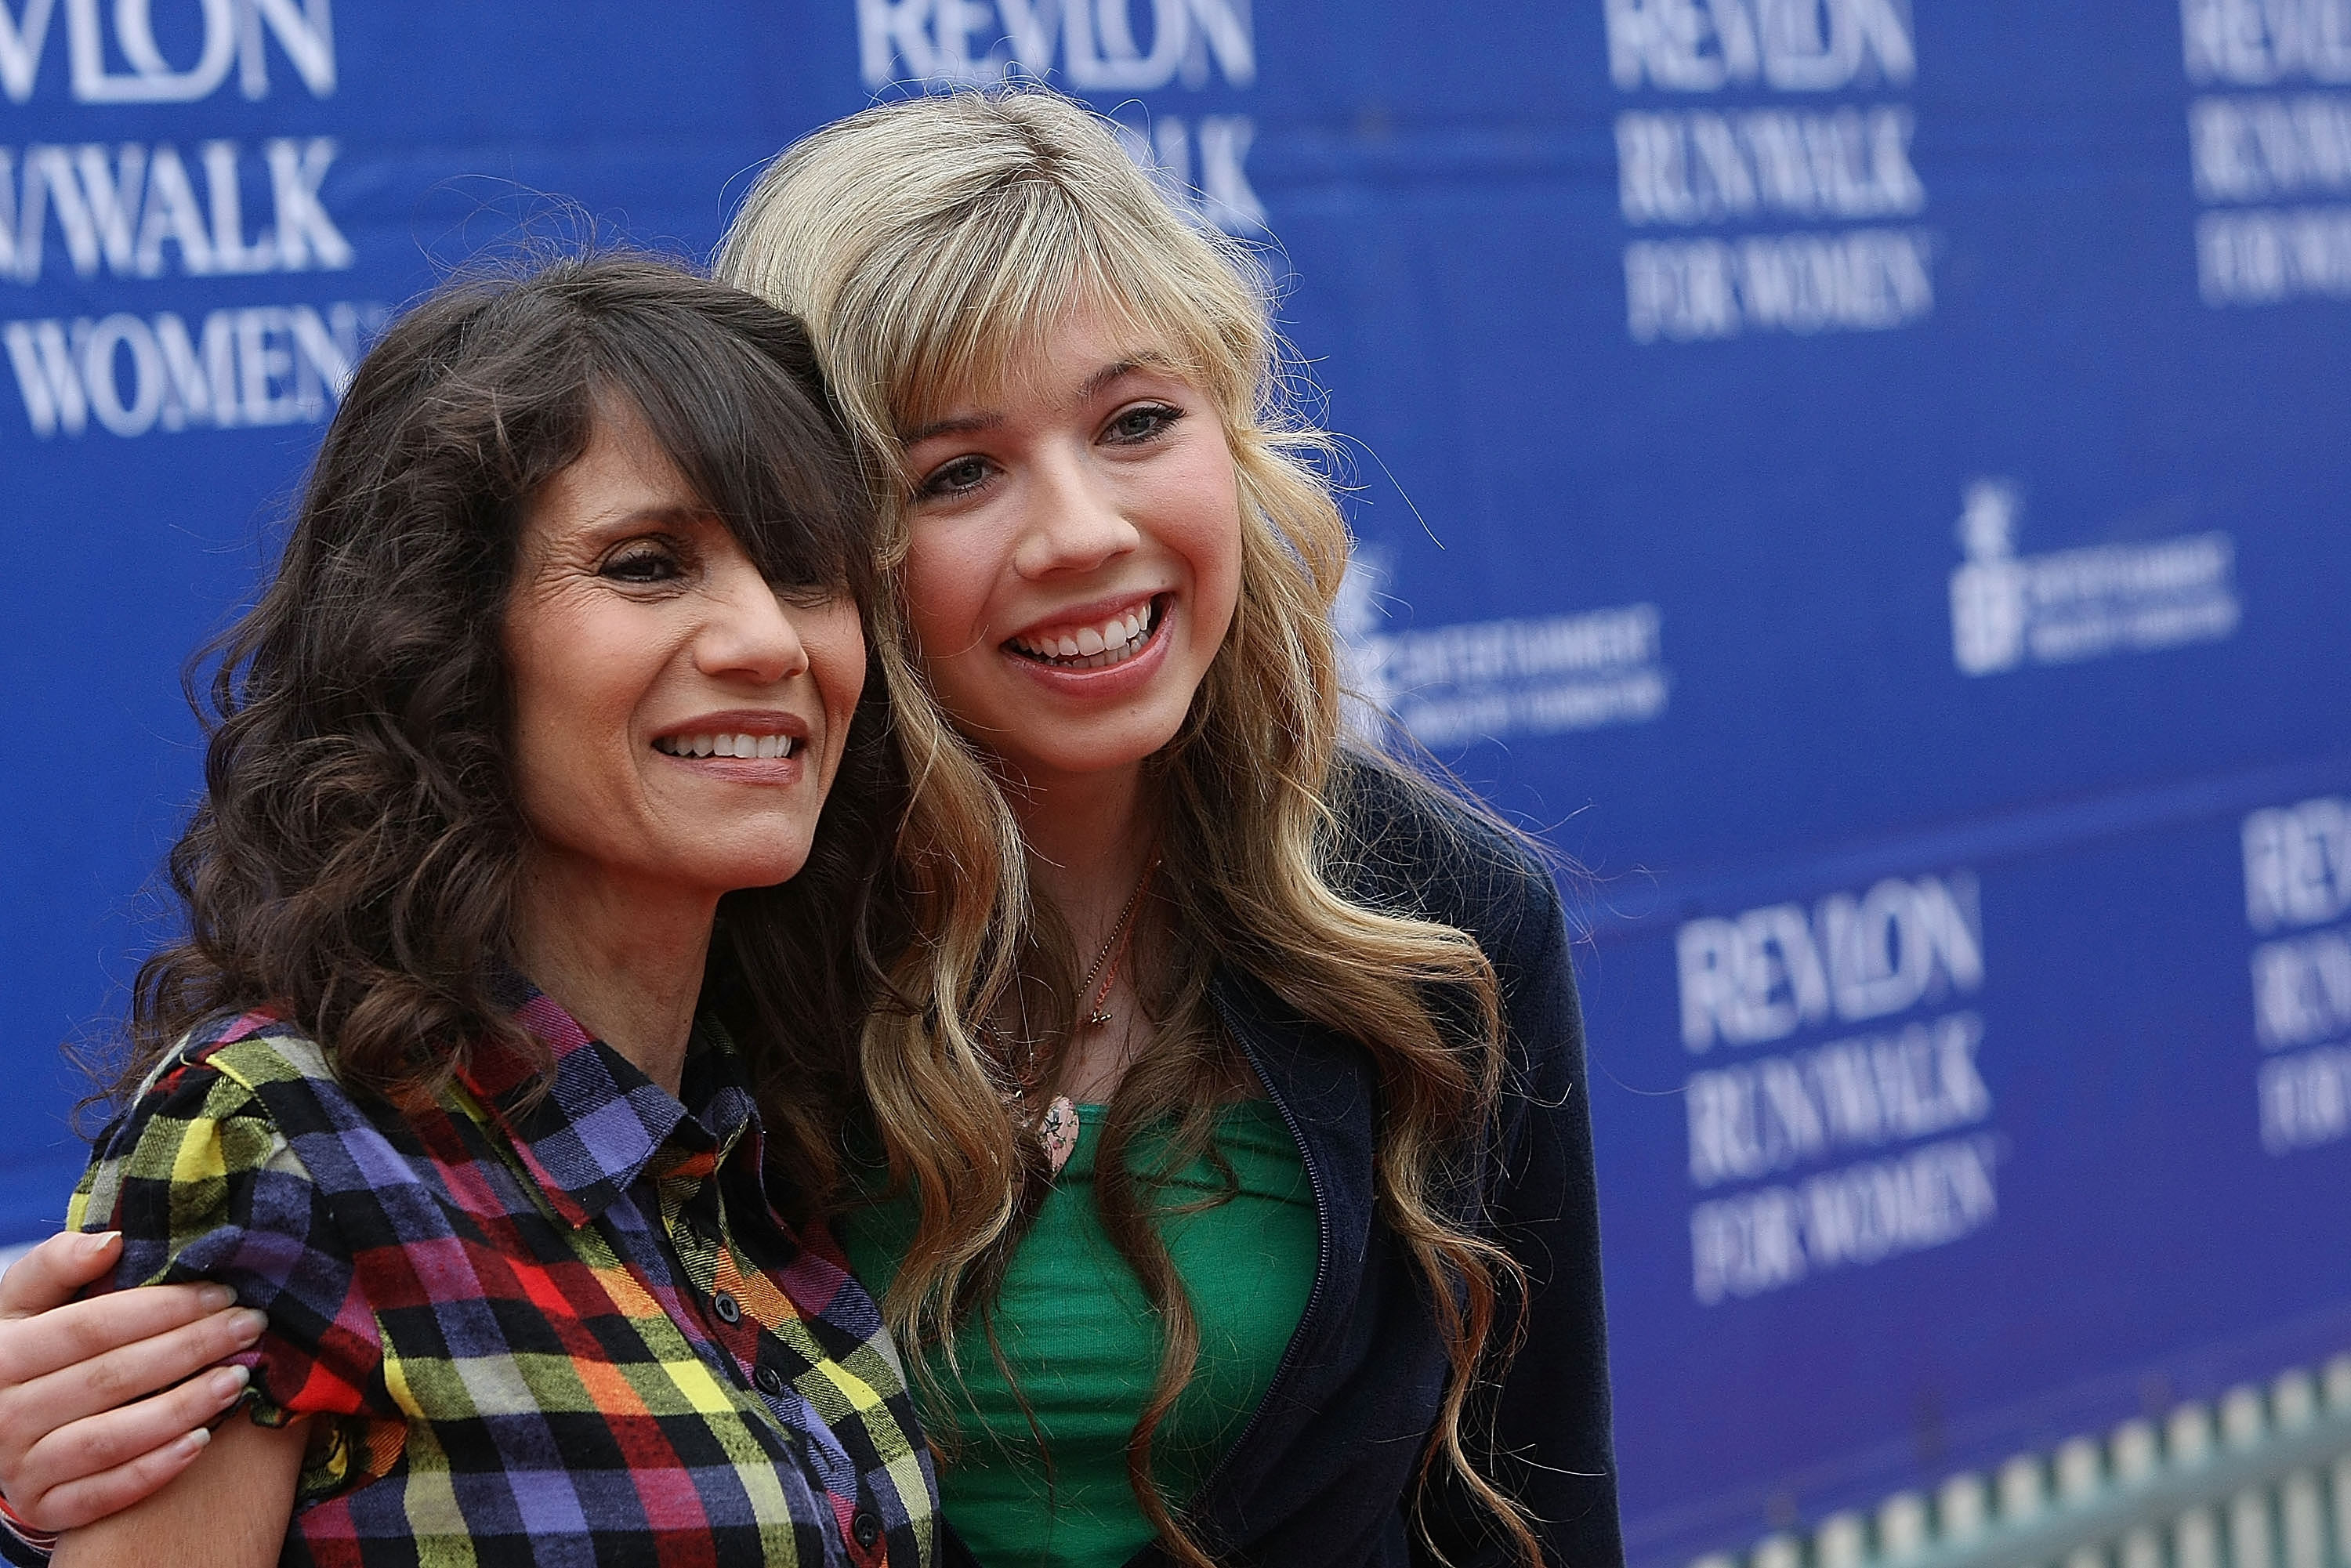 Jennette McCurdy (R) and mother arrive at The 16 Annual Entertainment Industry Foundation Revlon Run/Walk for Women held at The Los Angeles Memorial Coliseum on May 9, 2009 in Los Angeles, California